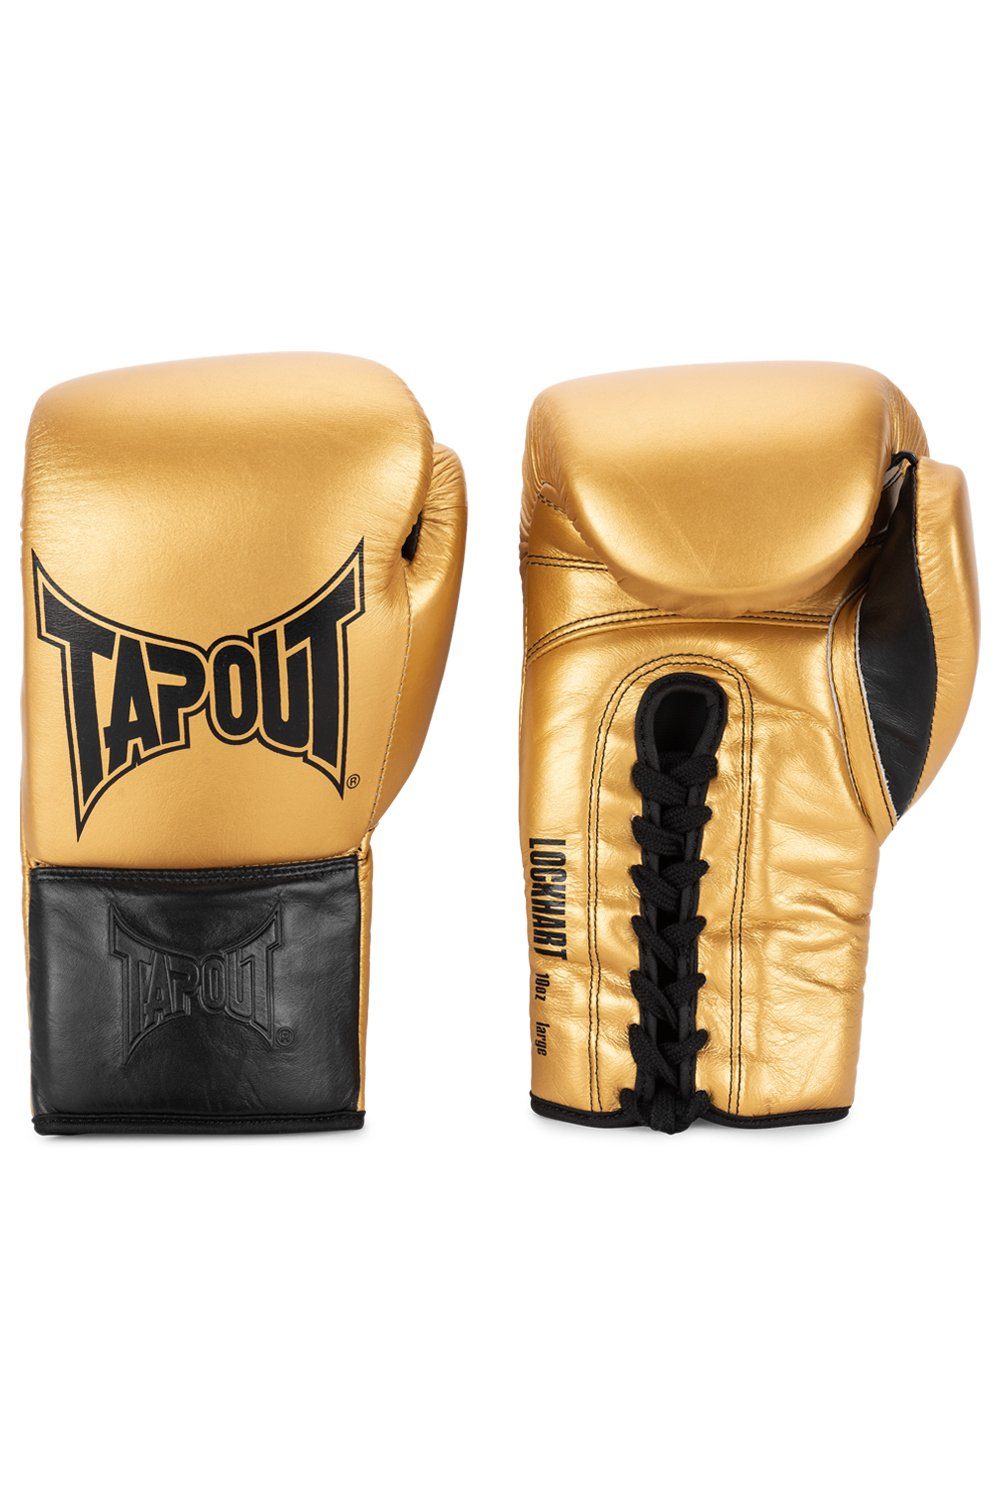 Boxhandschuhe LOCKHART TAPOUT